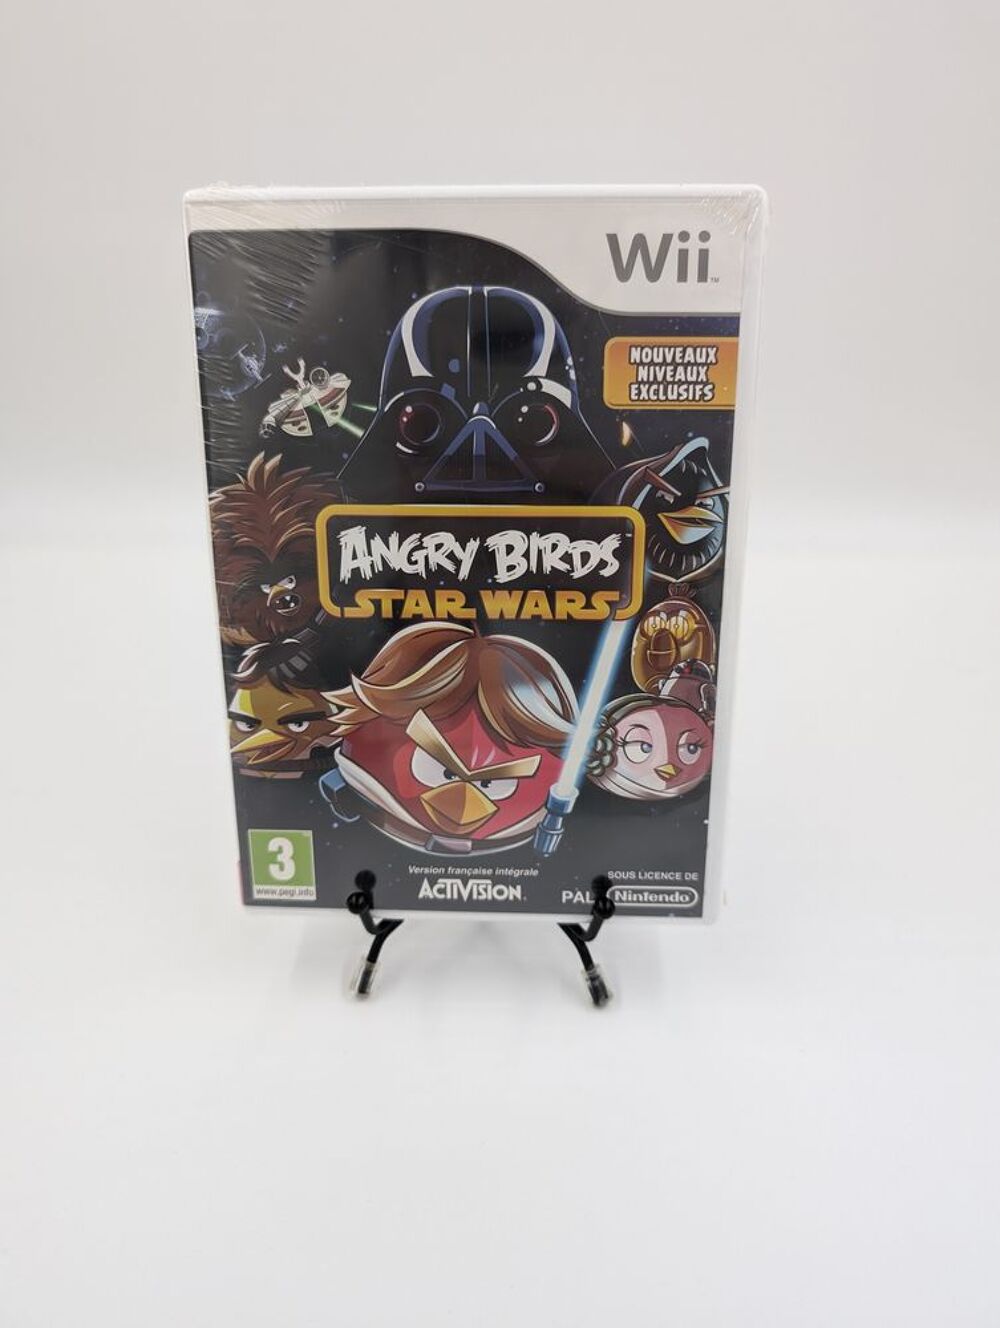 Jeu Nintendo Wii Angry Birds Star Wars neuf sous blister Consoles et jeux vidos